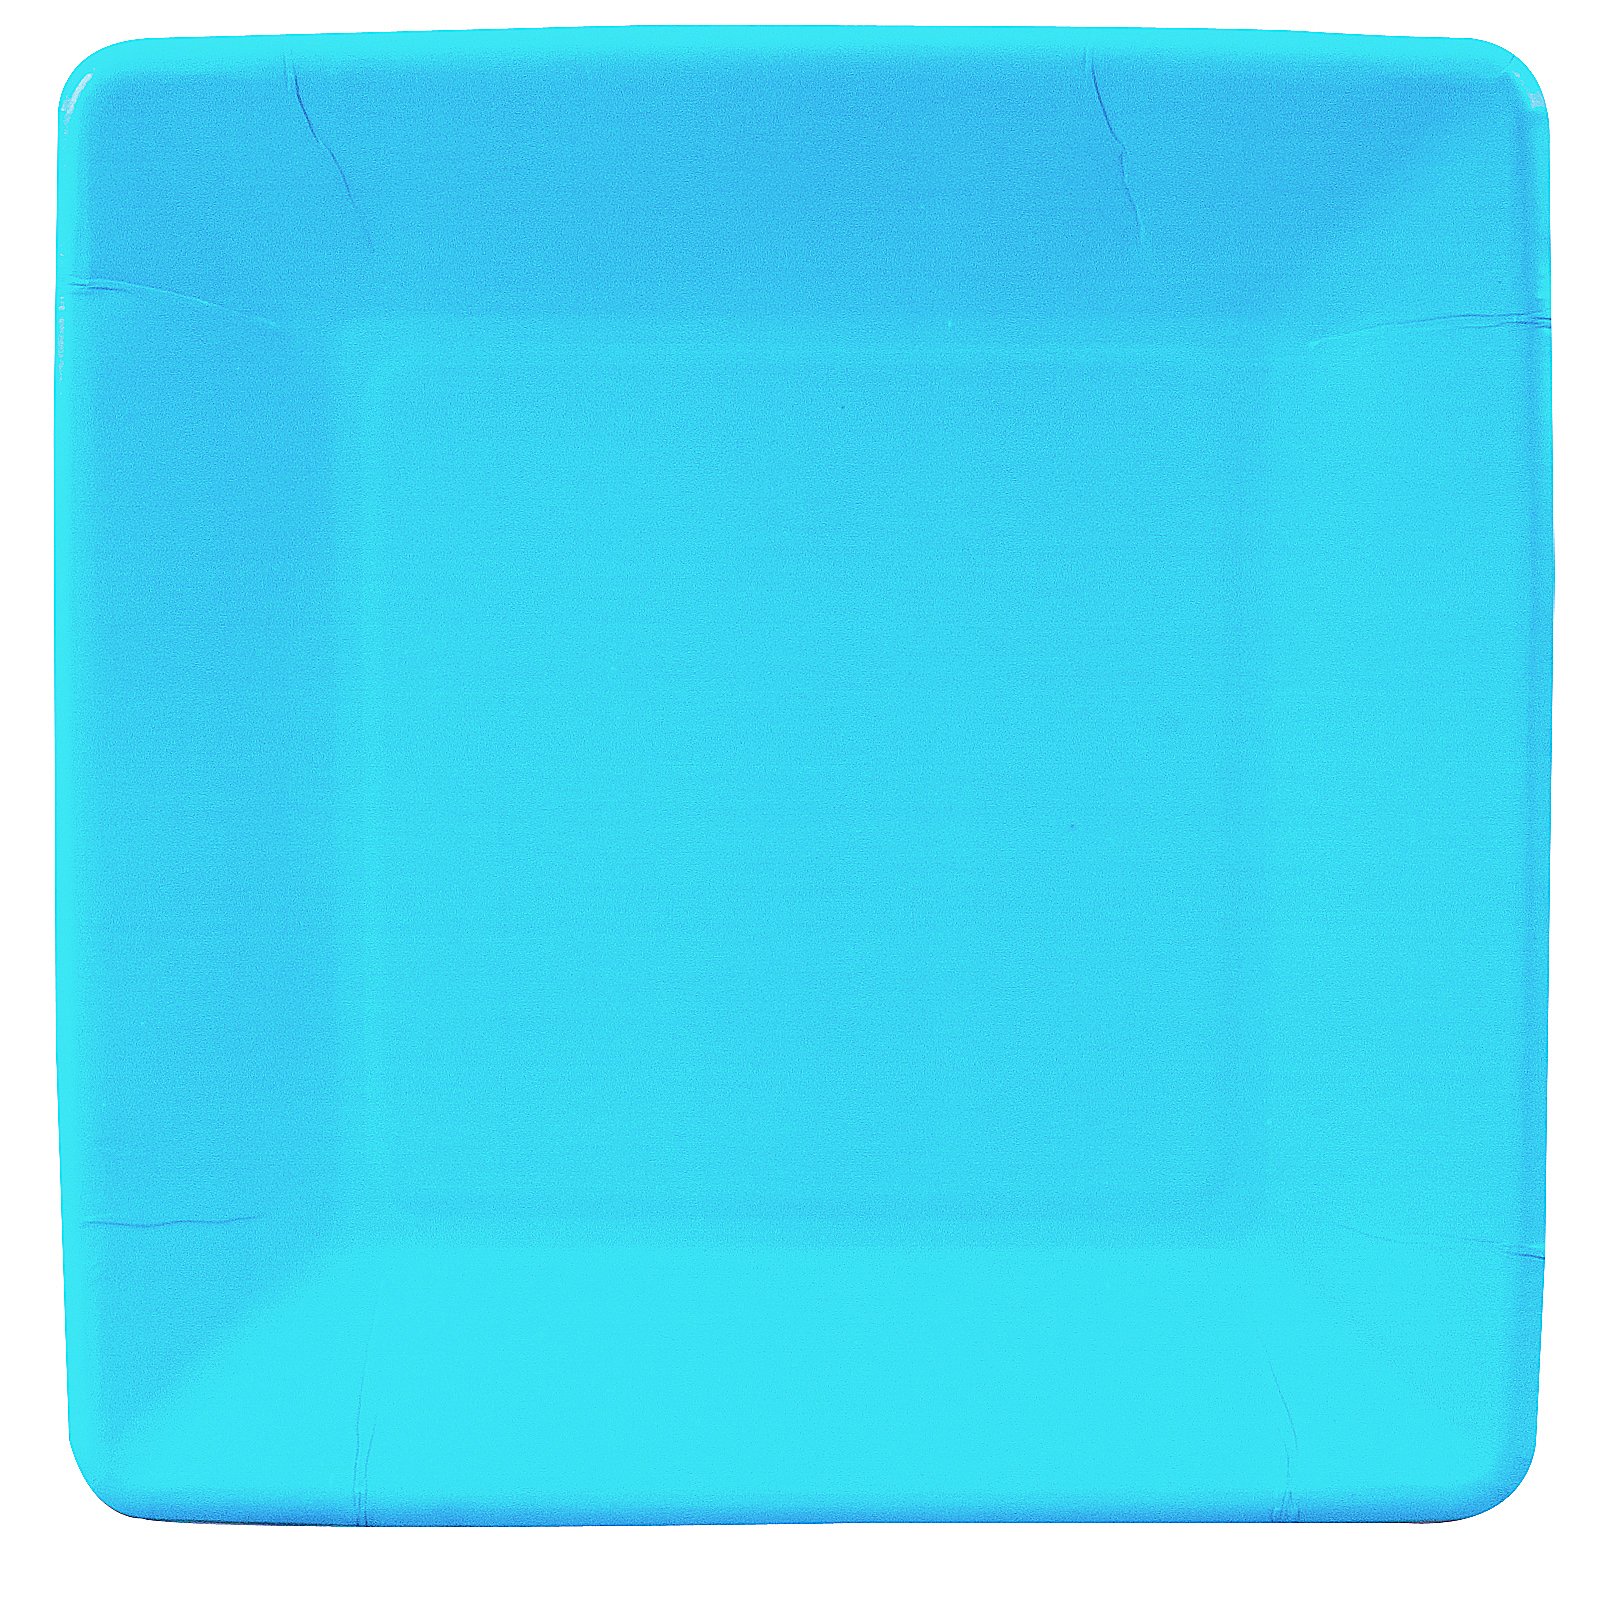 Bermuda Blue (Turquoise) Square Dinner Plates (18 count)